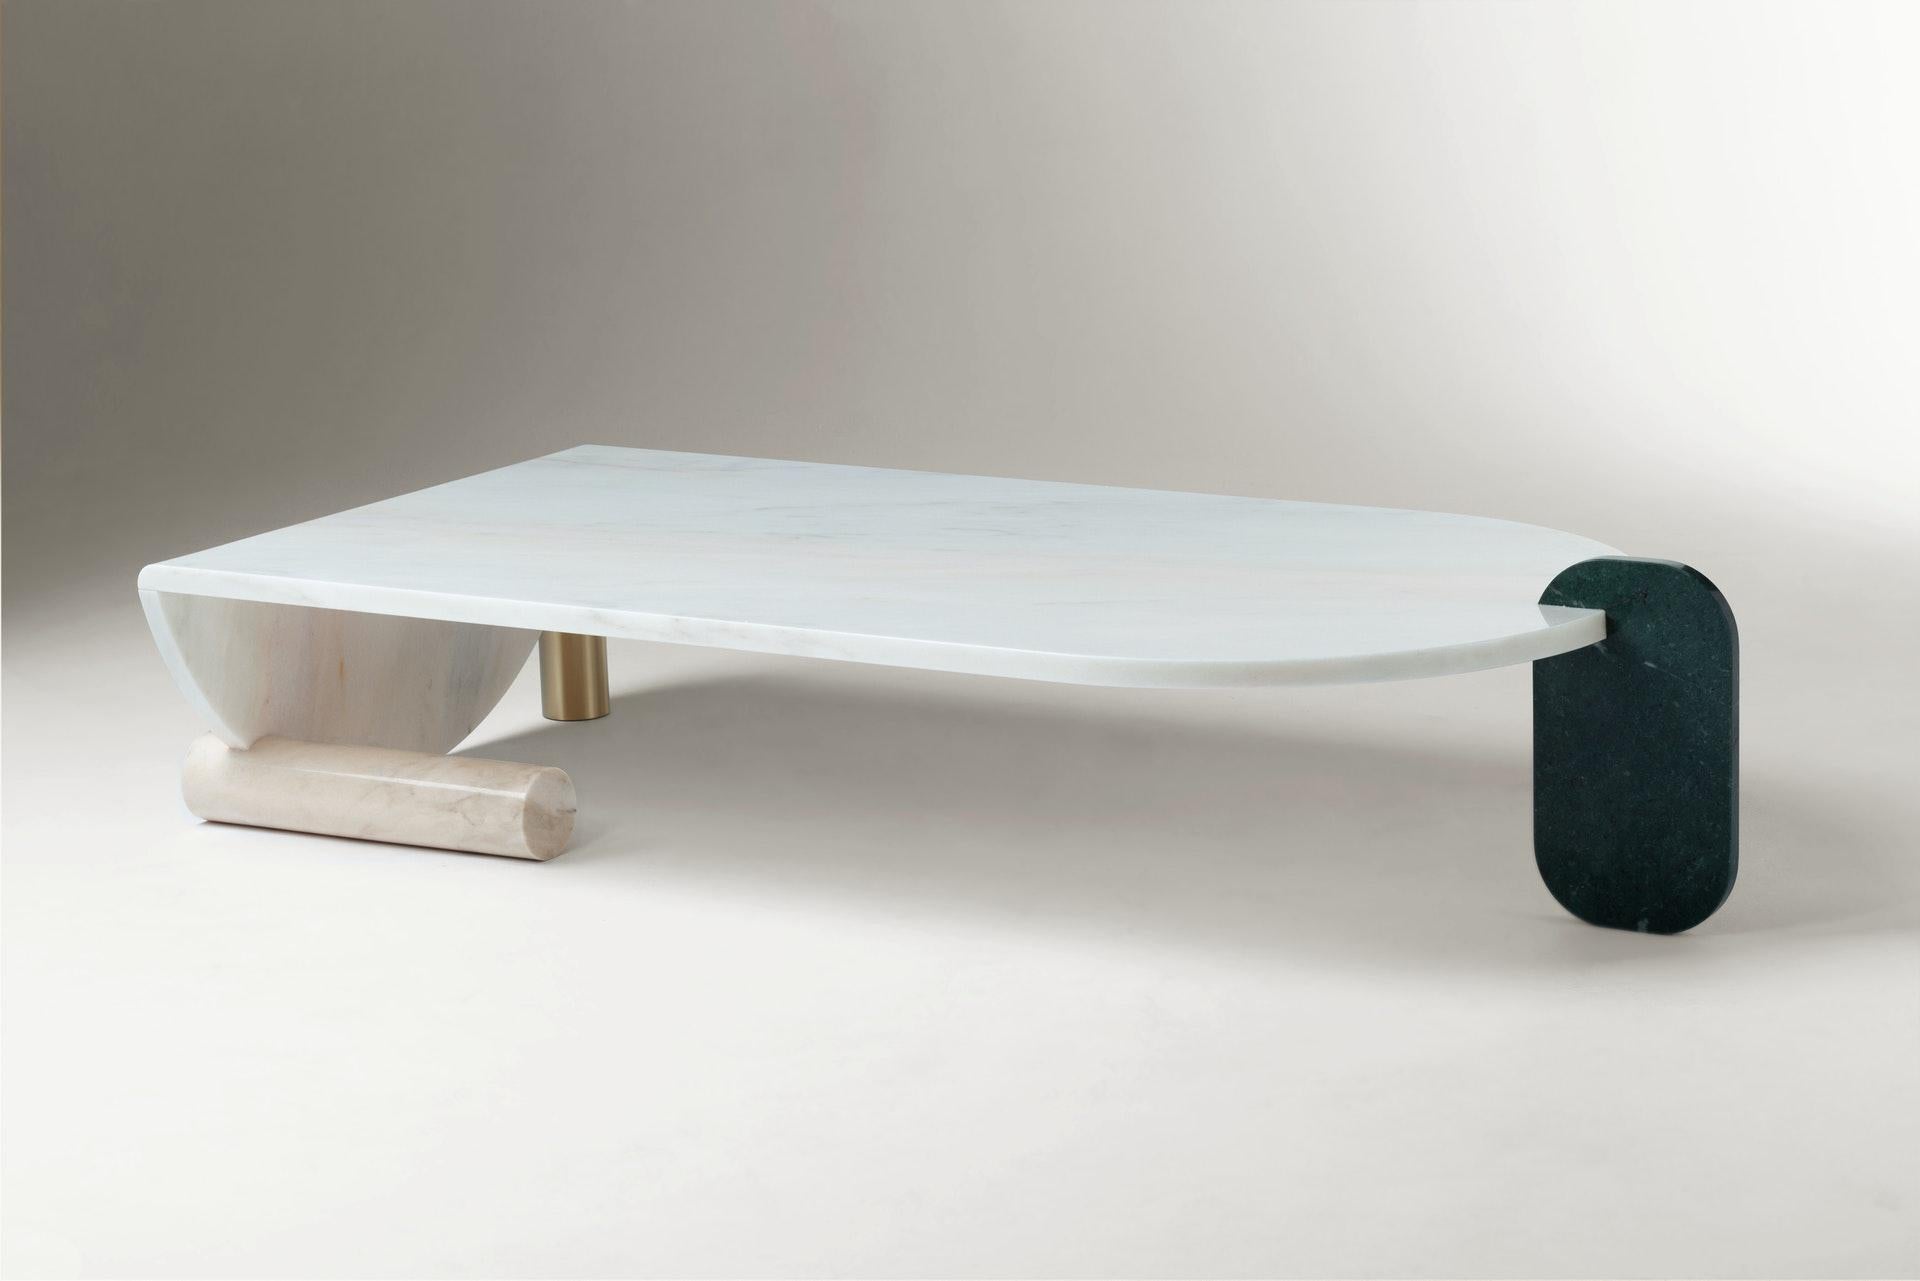 Playing Games Marble Coffee Table by Dooq
Measures: W 168 cm 71”
D 80 cm 32”
H 32 cm 13”

Materials: Top marble: Guatemala green, estremoz white,
estremoz rose, Carrara
side and cilindric base marble: Guatemala green,
estremoz white, estremoz rose,